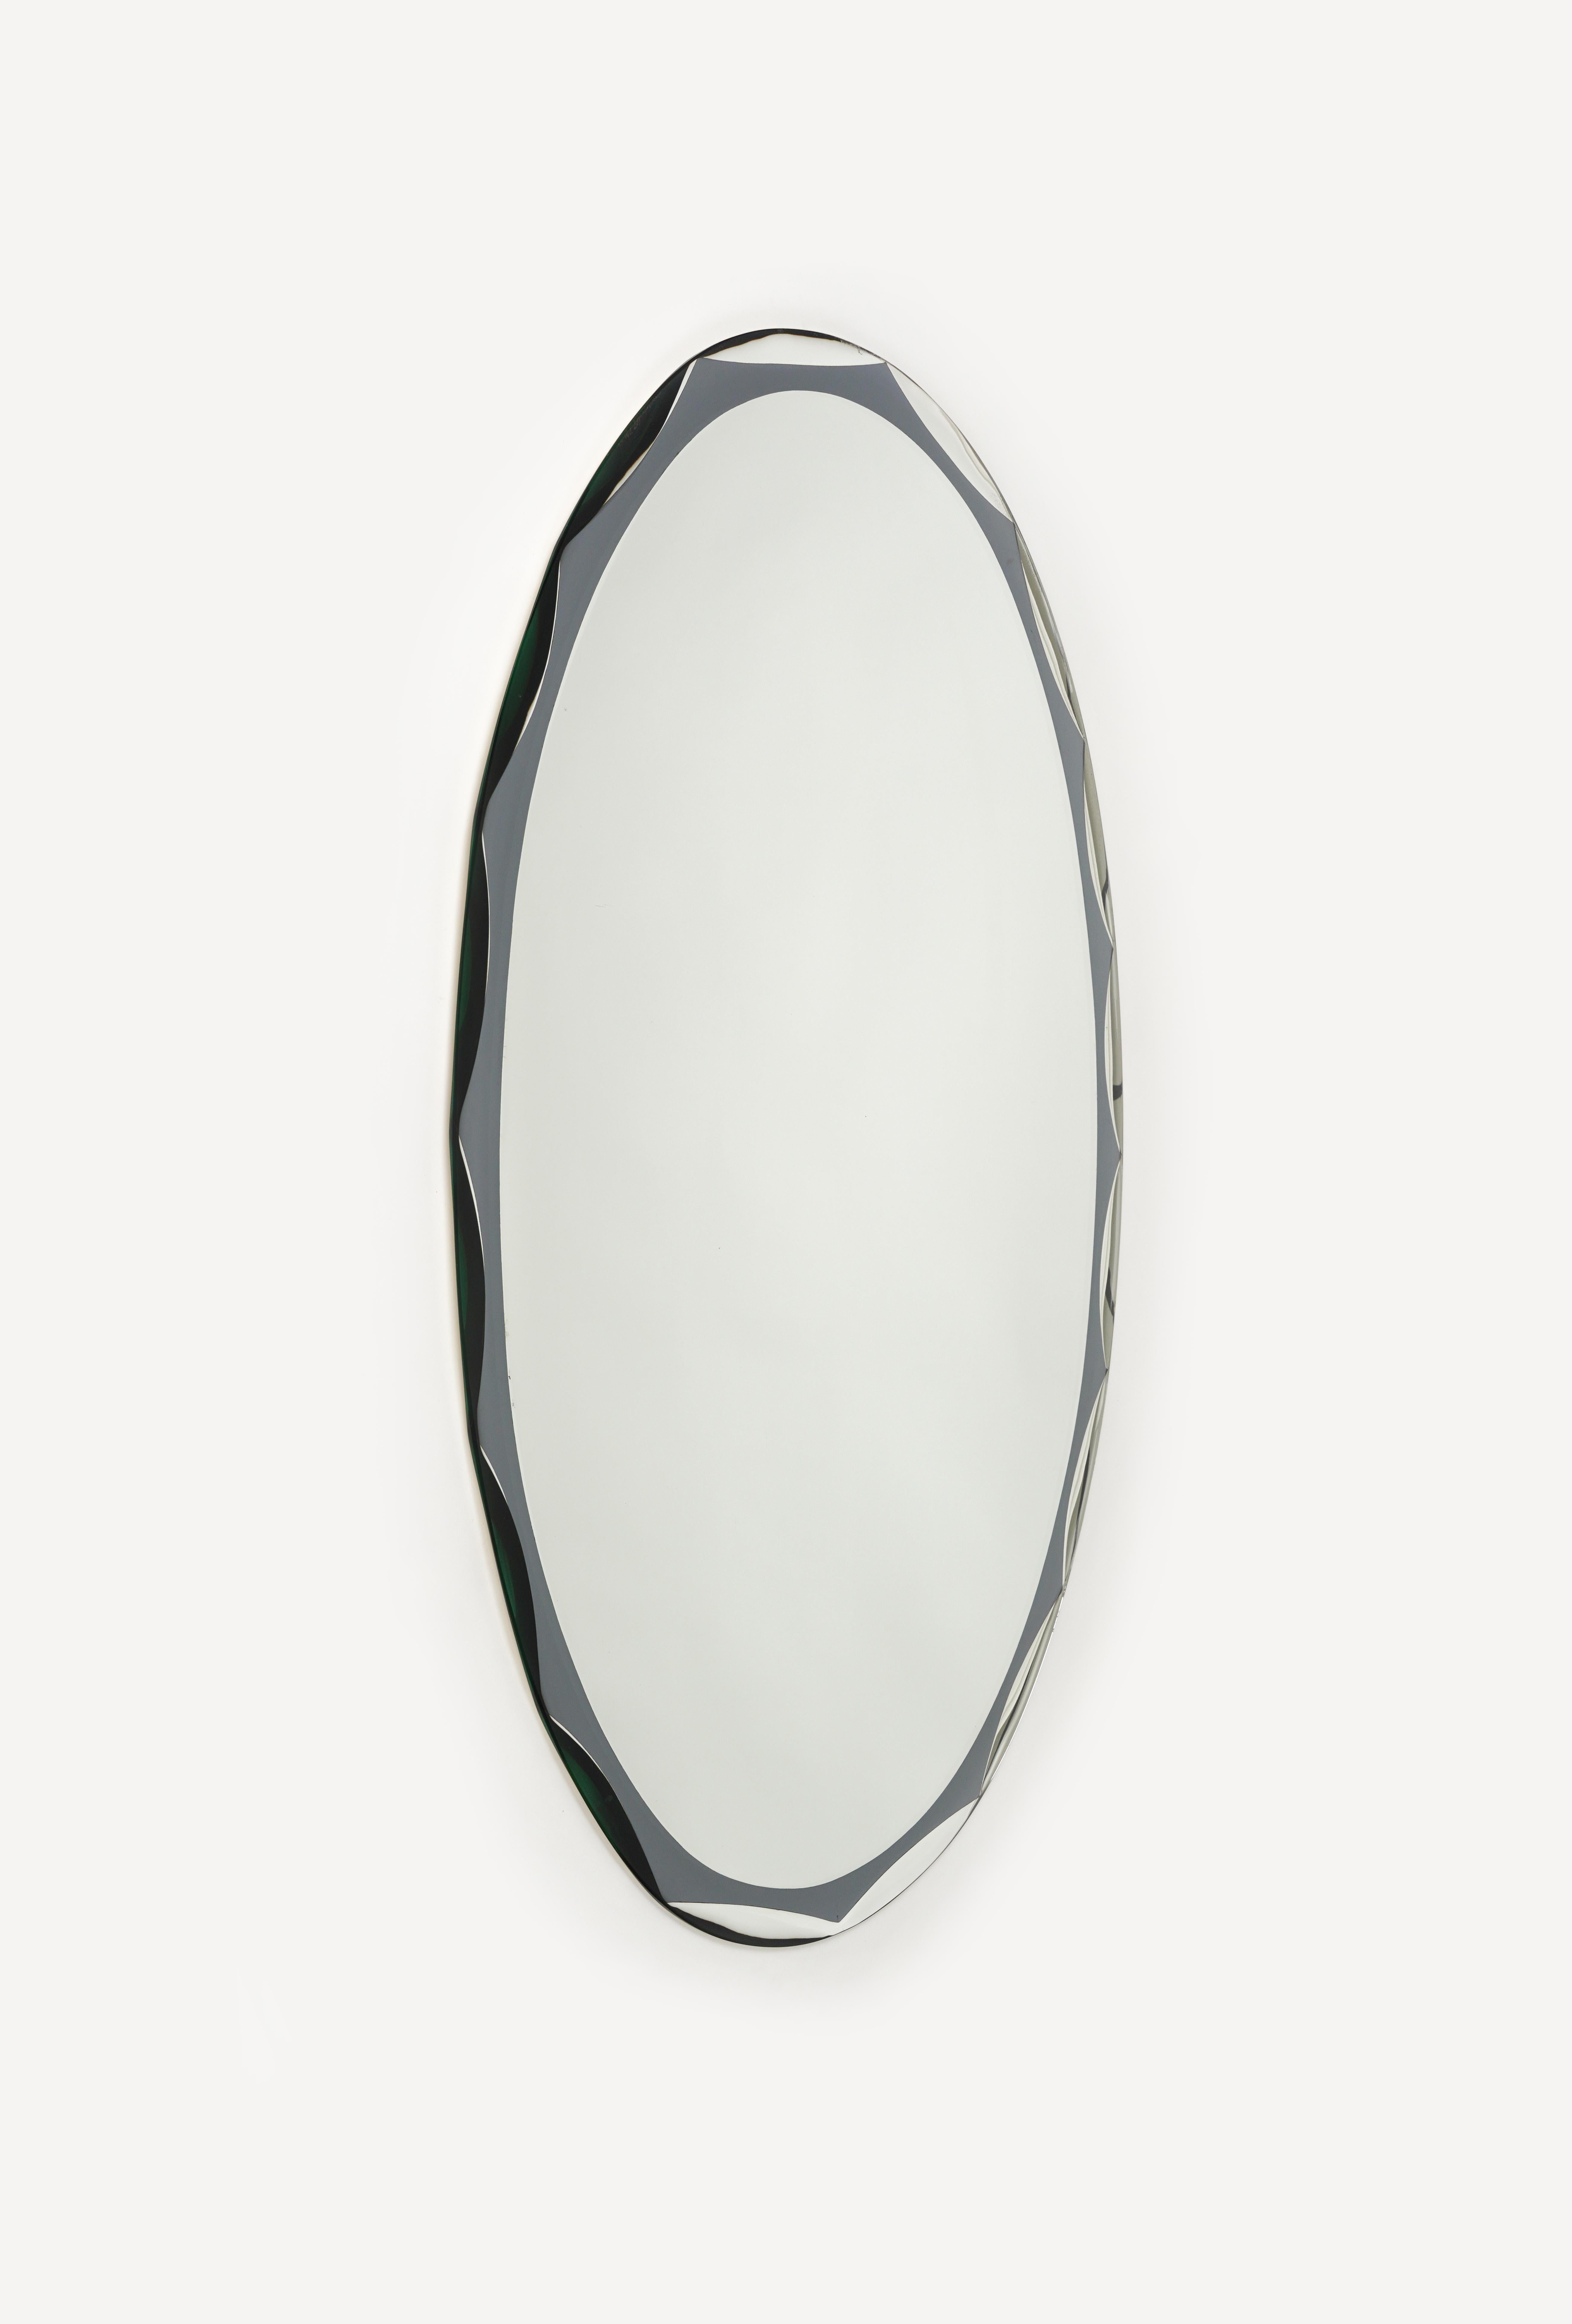 Midcentury amazing oval wall mirror with a black mirrored border attributed to Metalvetro Galvorame.

Made in Italy in the 1970s.

The mirror is very well-made and in good vintage condition.

The mirror would be perfect for a bedroom, dressing room,